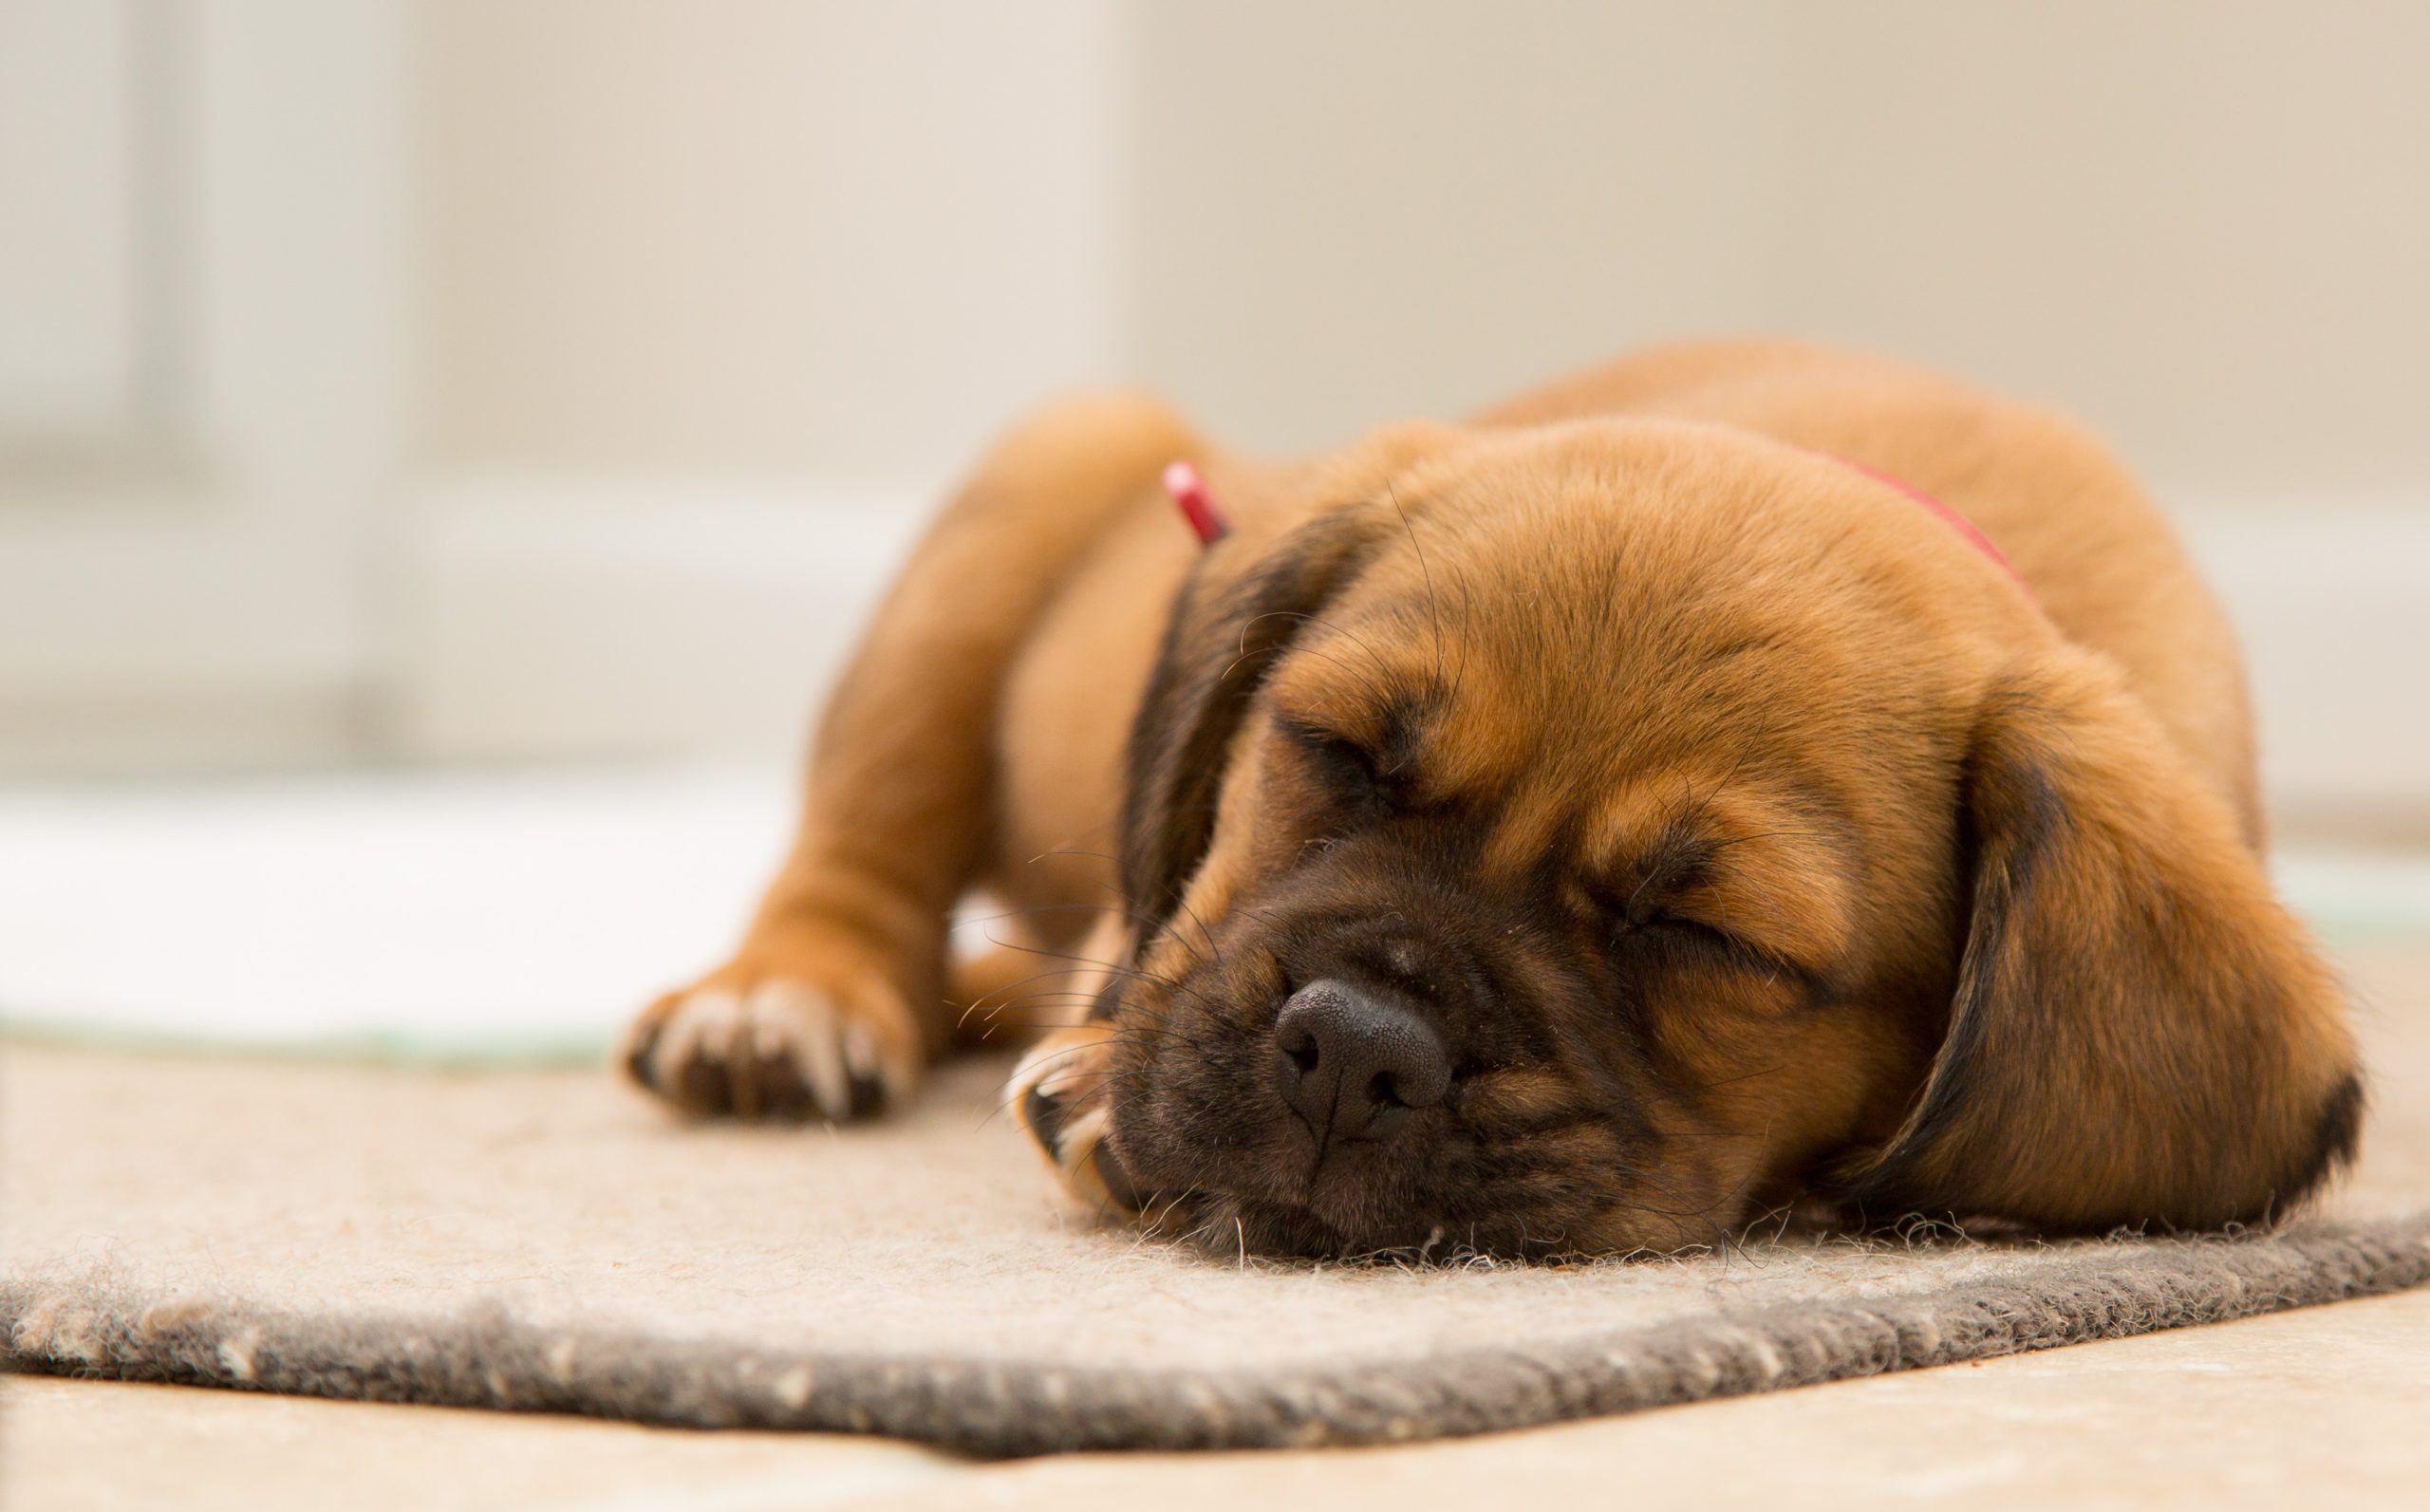 small brown puppy sleeping on the carpet